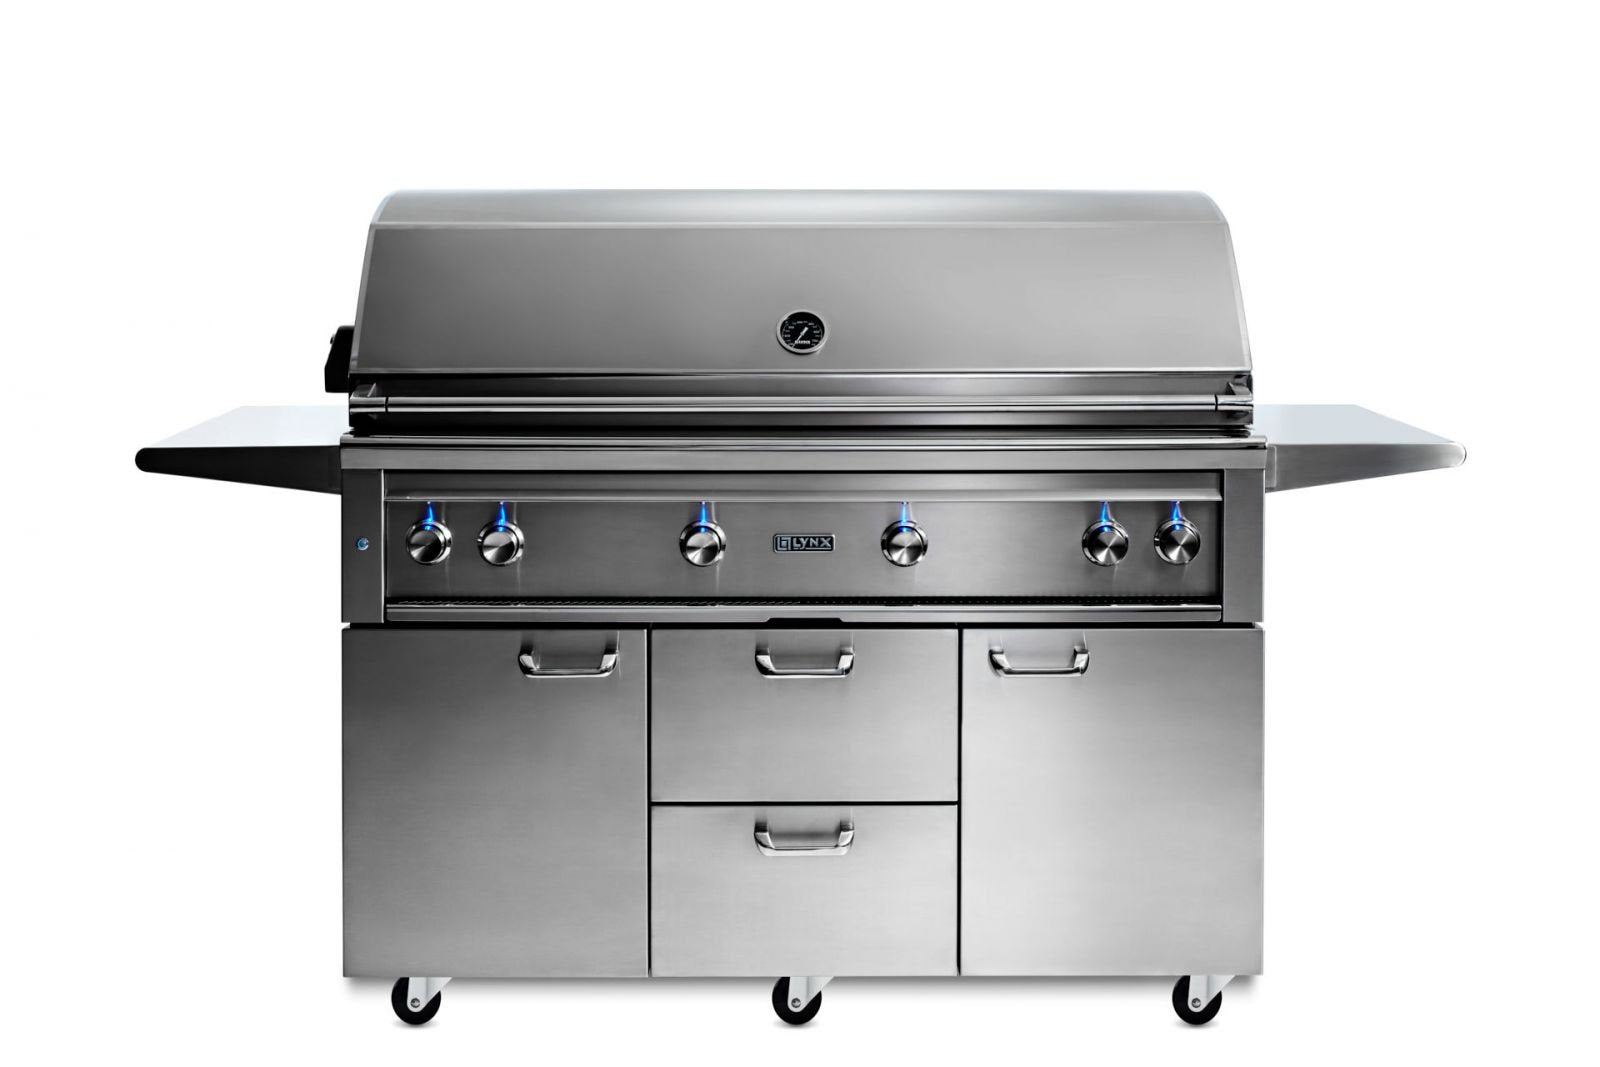 54" Professional Freestanding Grill with 1 Trident Infrared Burner and 3 Ceramic Burners and Rotisserie (L54TRF)